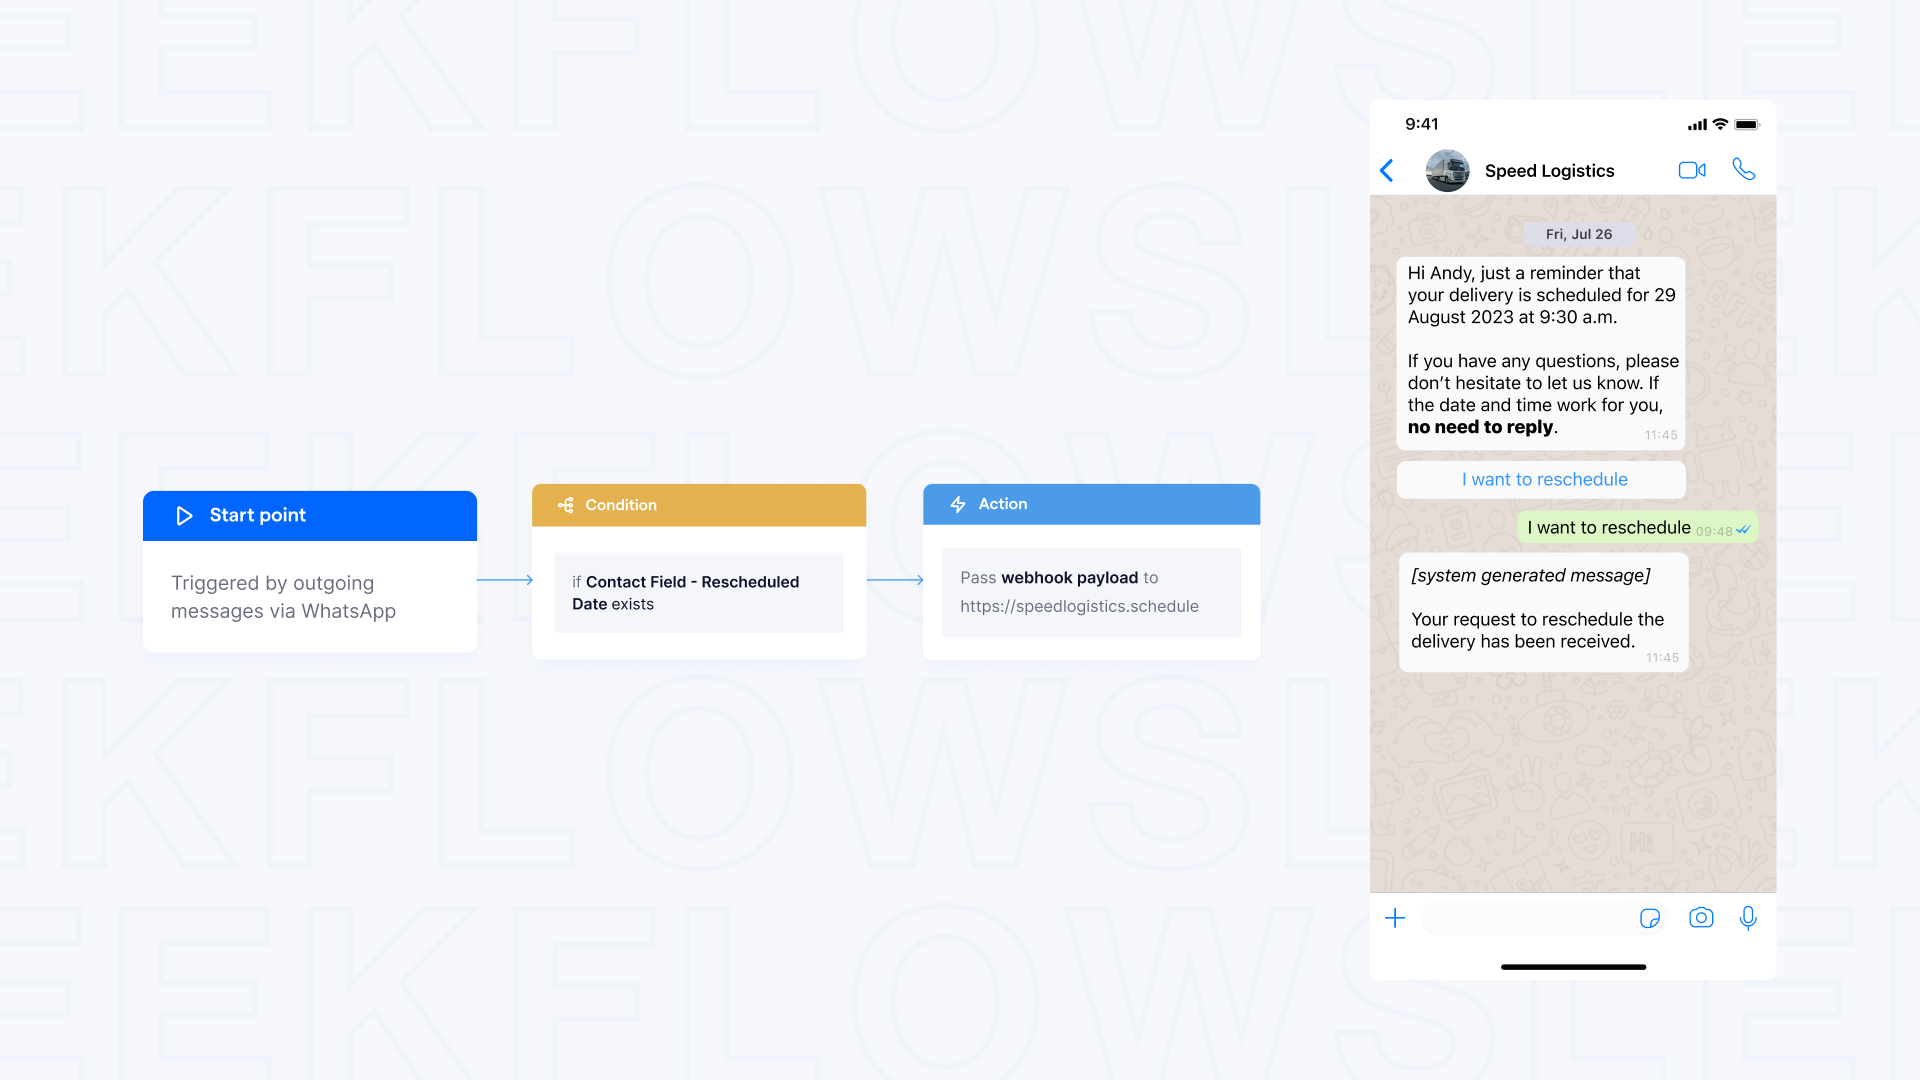 Flow Builder operations use case